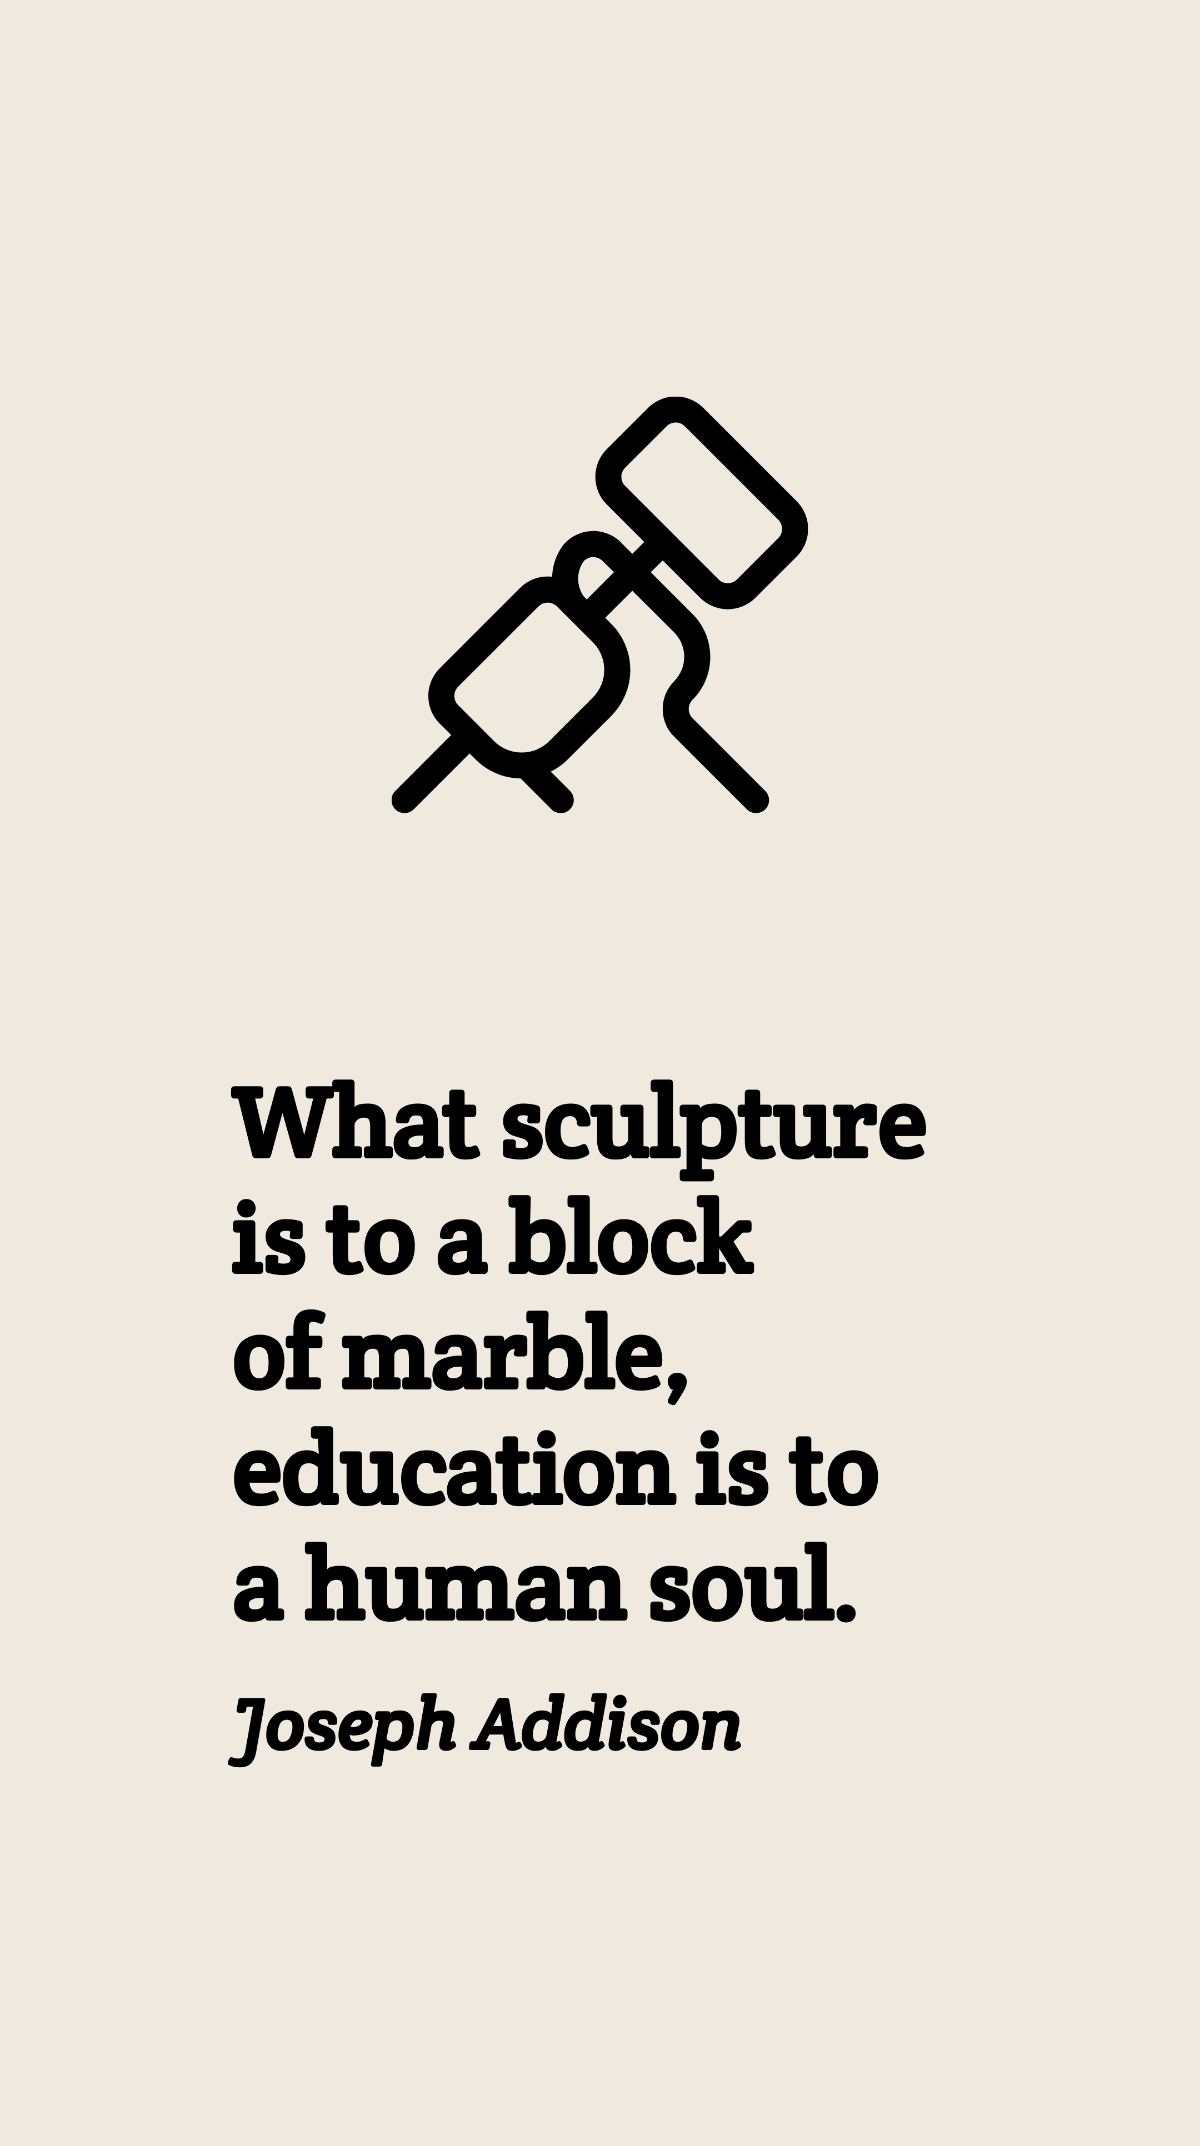 Joseph Addison - What sculpture is to a block of marble, education is to a human soul.